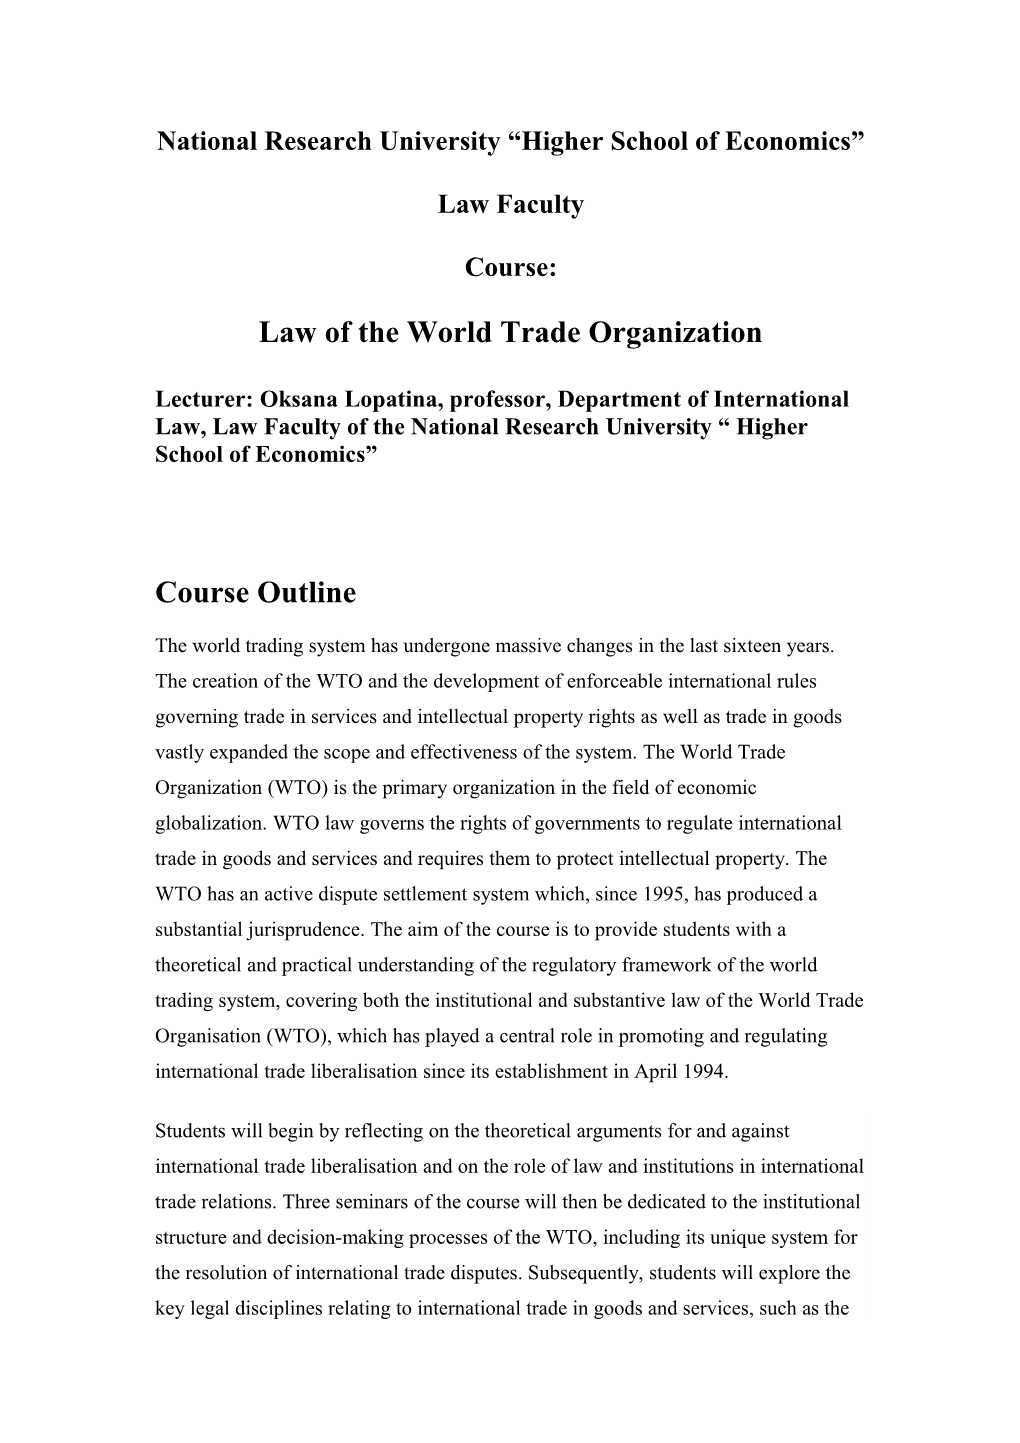 Law of Wto Course Outline